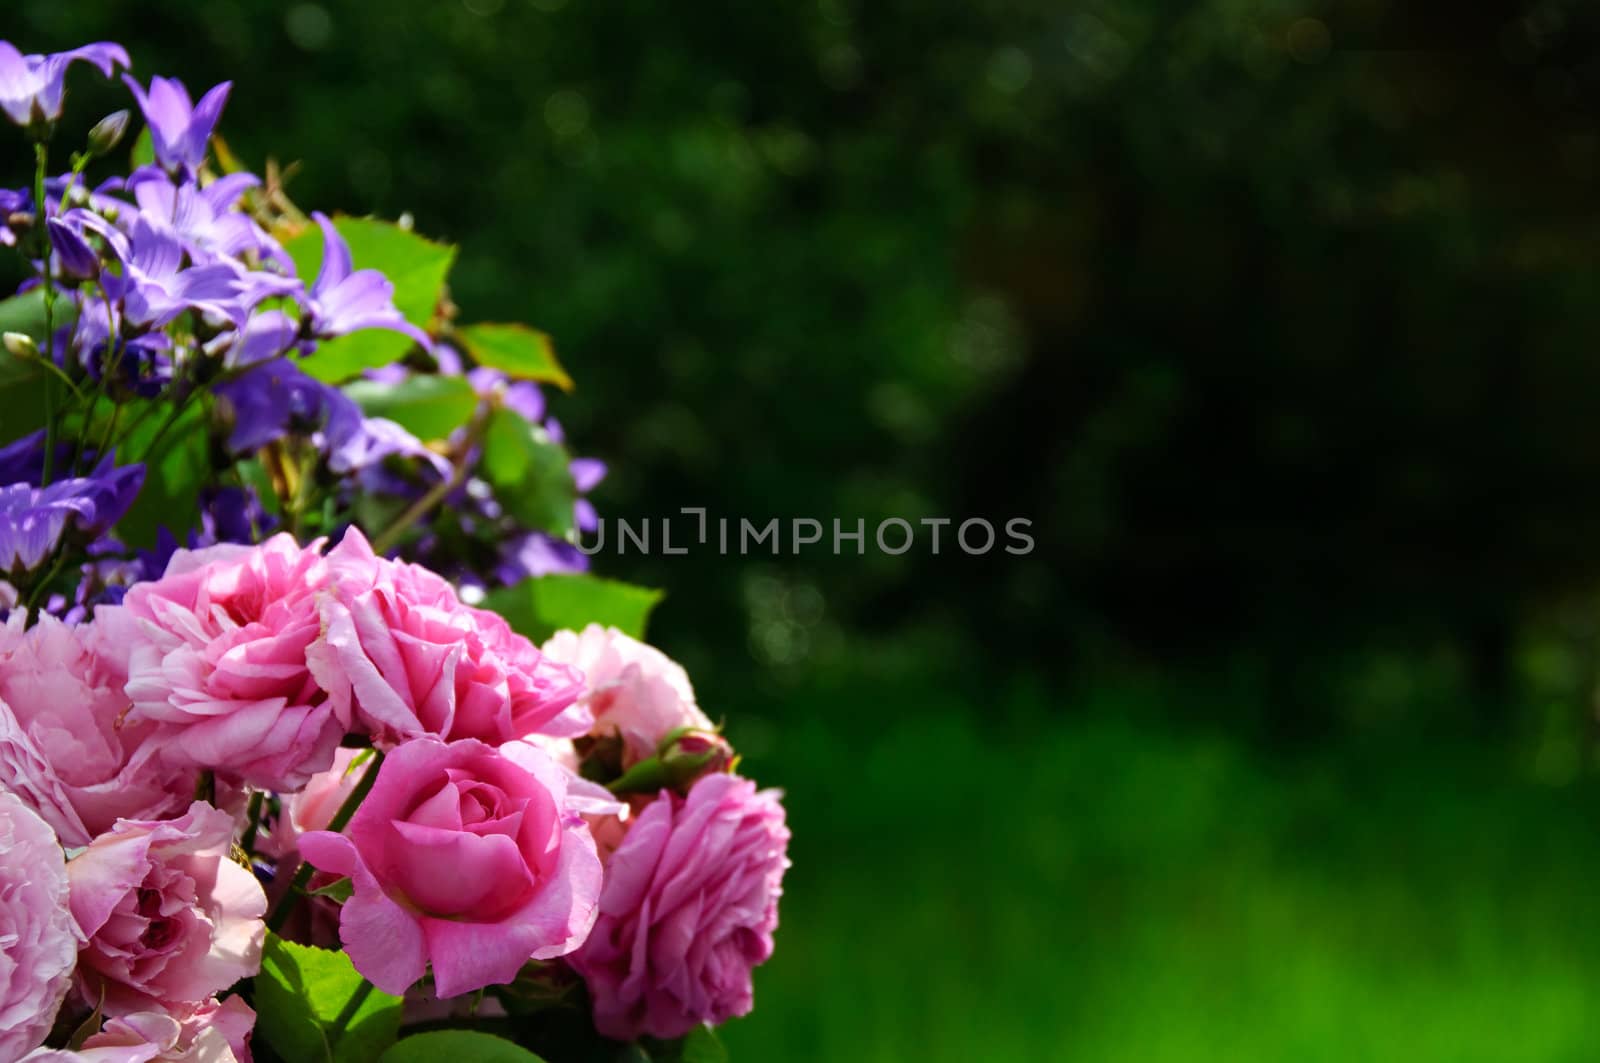 Flower border with roses by GryT